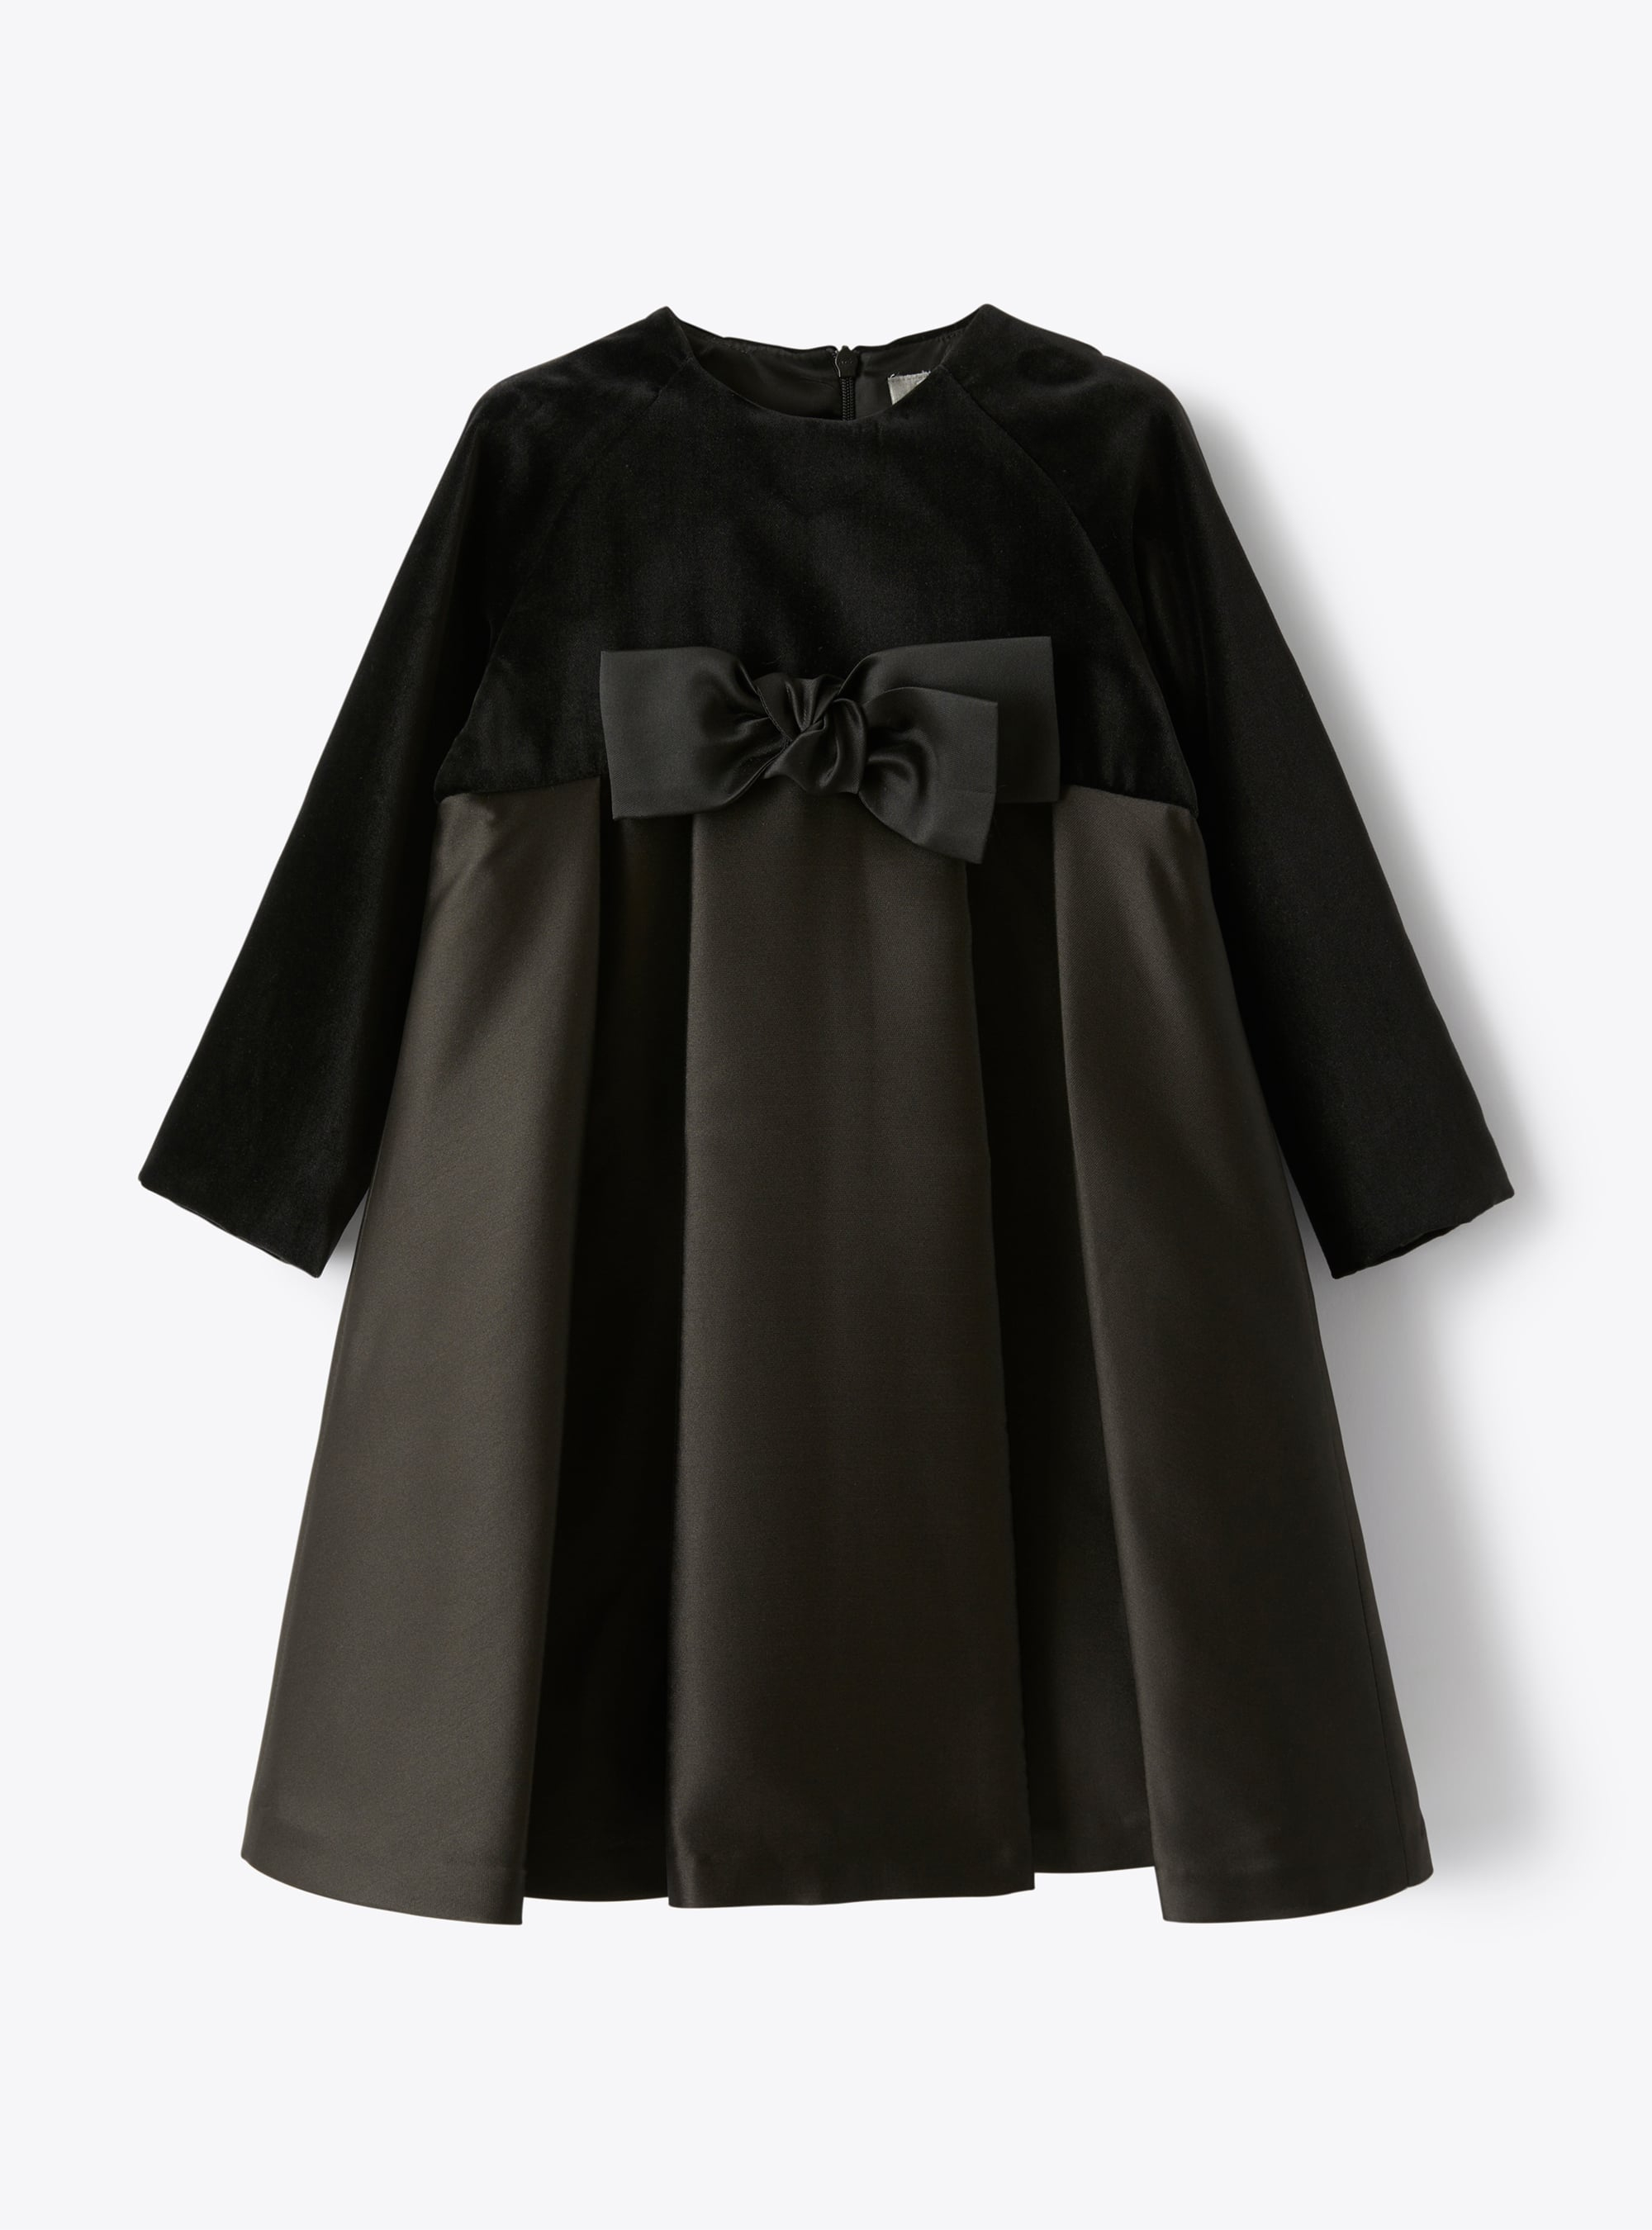 Dress in mikado fabric with a black bow detail - Dresses - Il Gufo